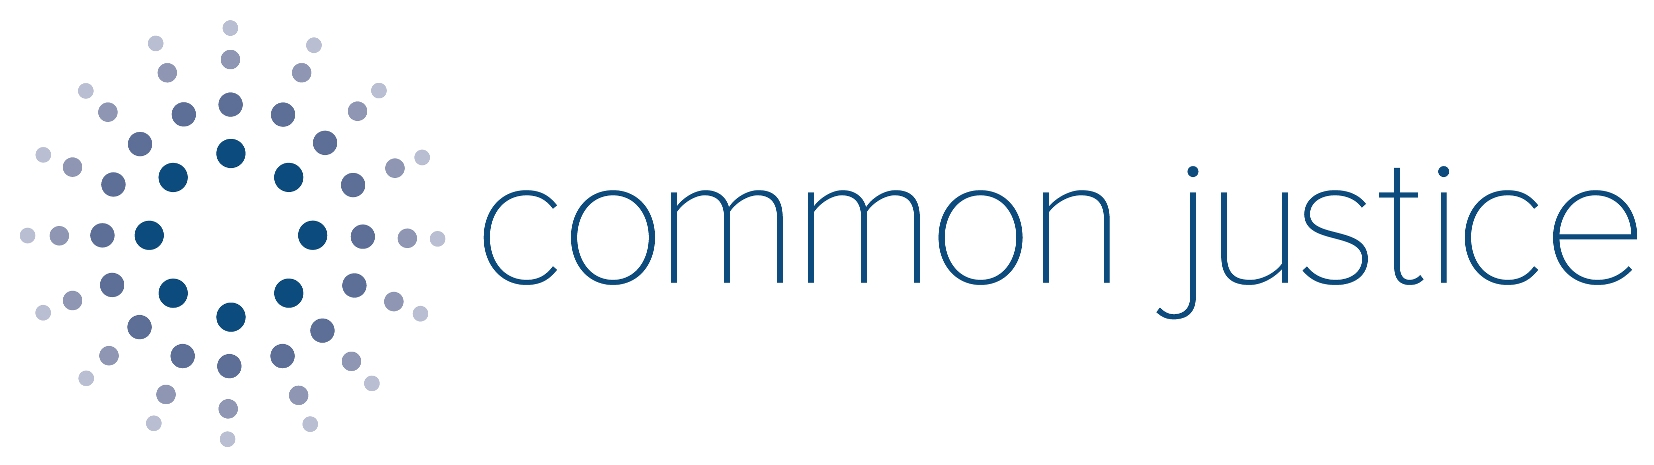 commonjustice_logo_small